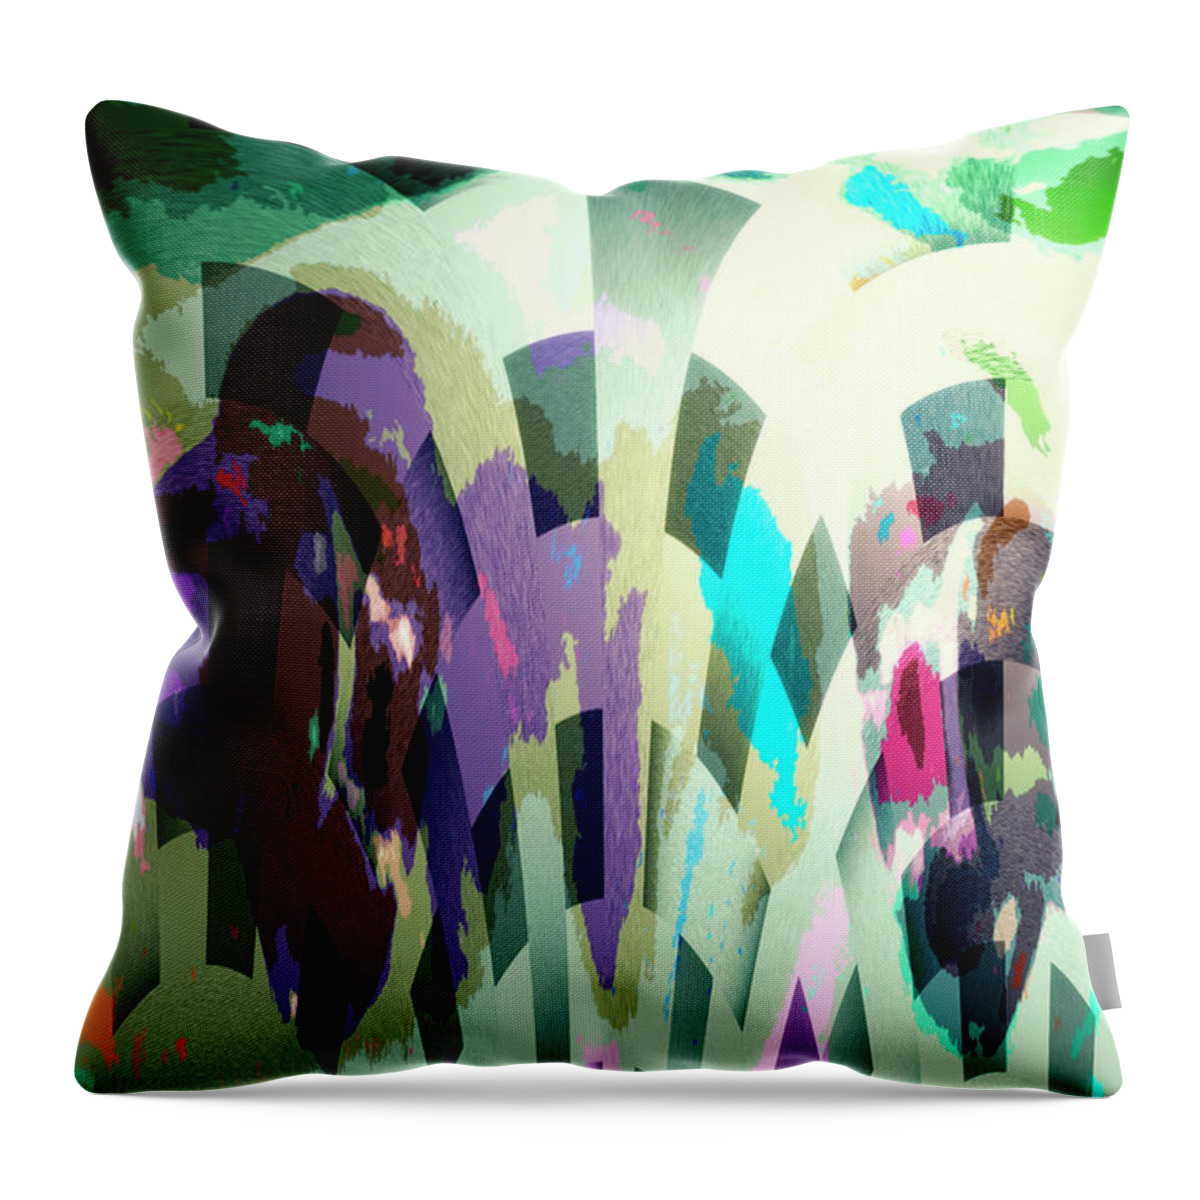 Abstract Throw Pillow featuring the digital art Gathering by Gerlinde Keating